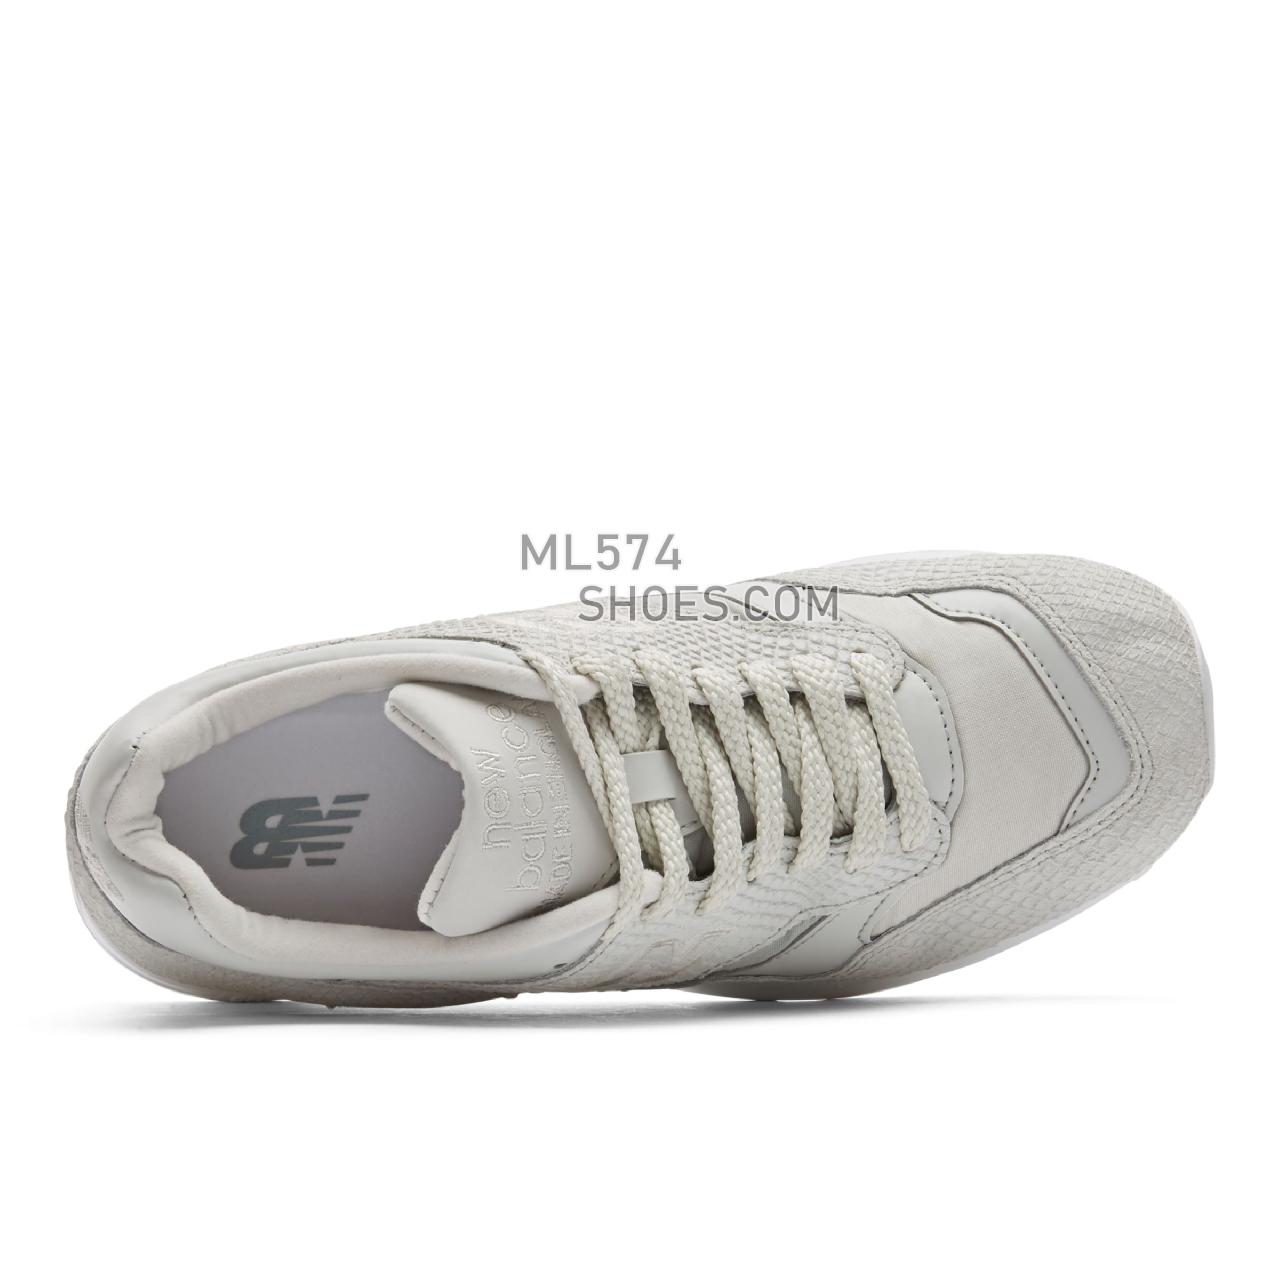 New Balance Made in UK 1500 Reptile Luxe - Men's Made in UK 1500 Reptile Luxe - Off White with White - W1500RWH